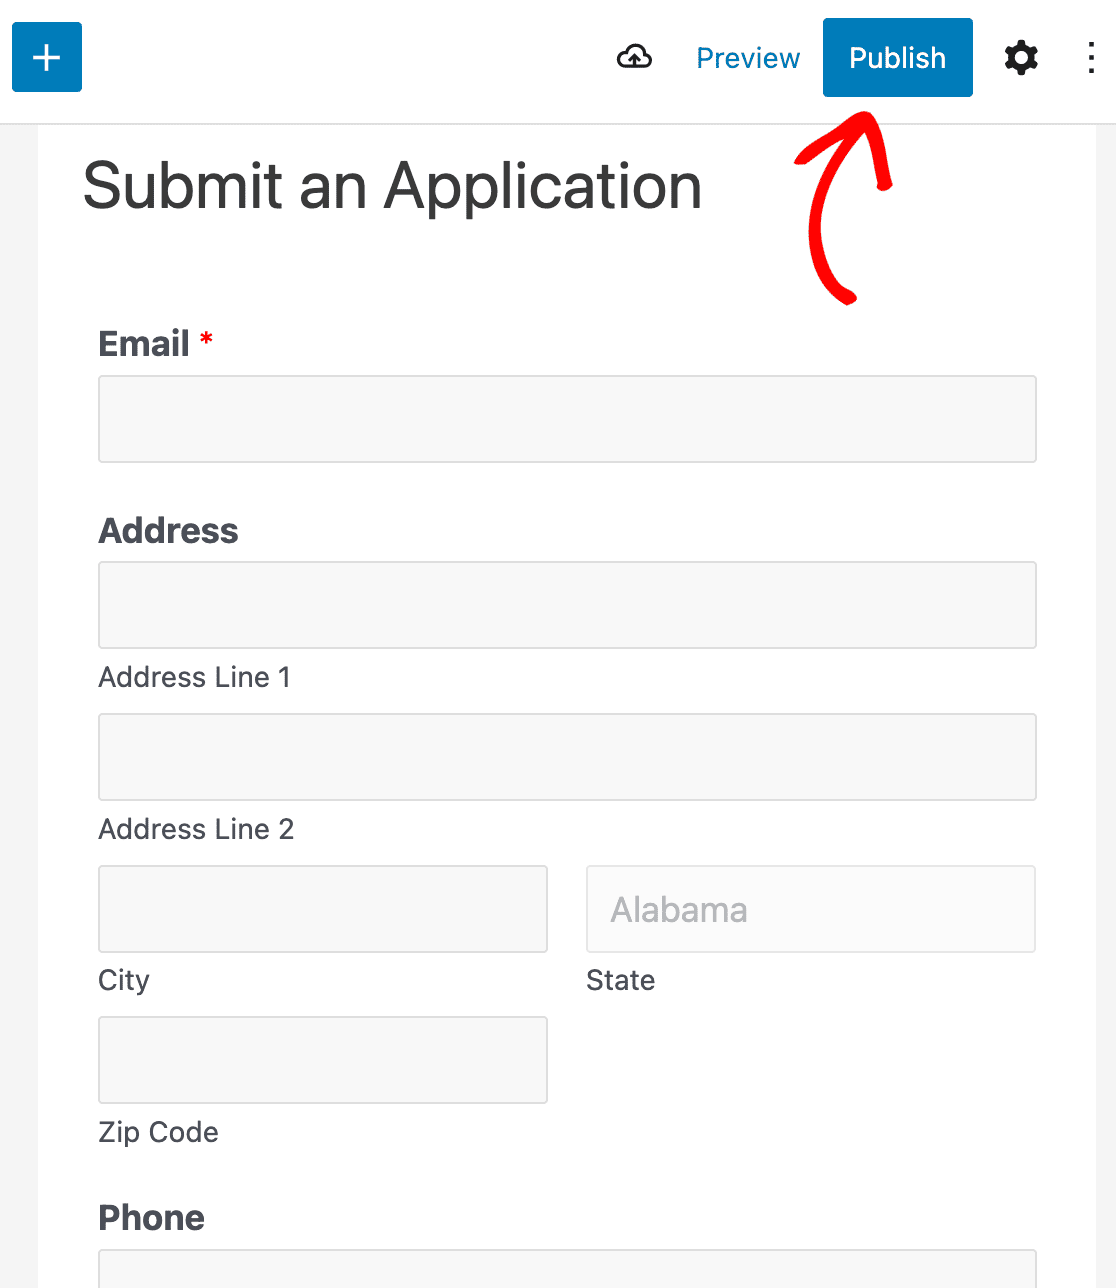 Publishing your college application form